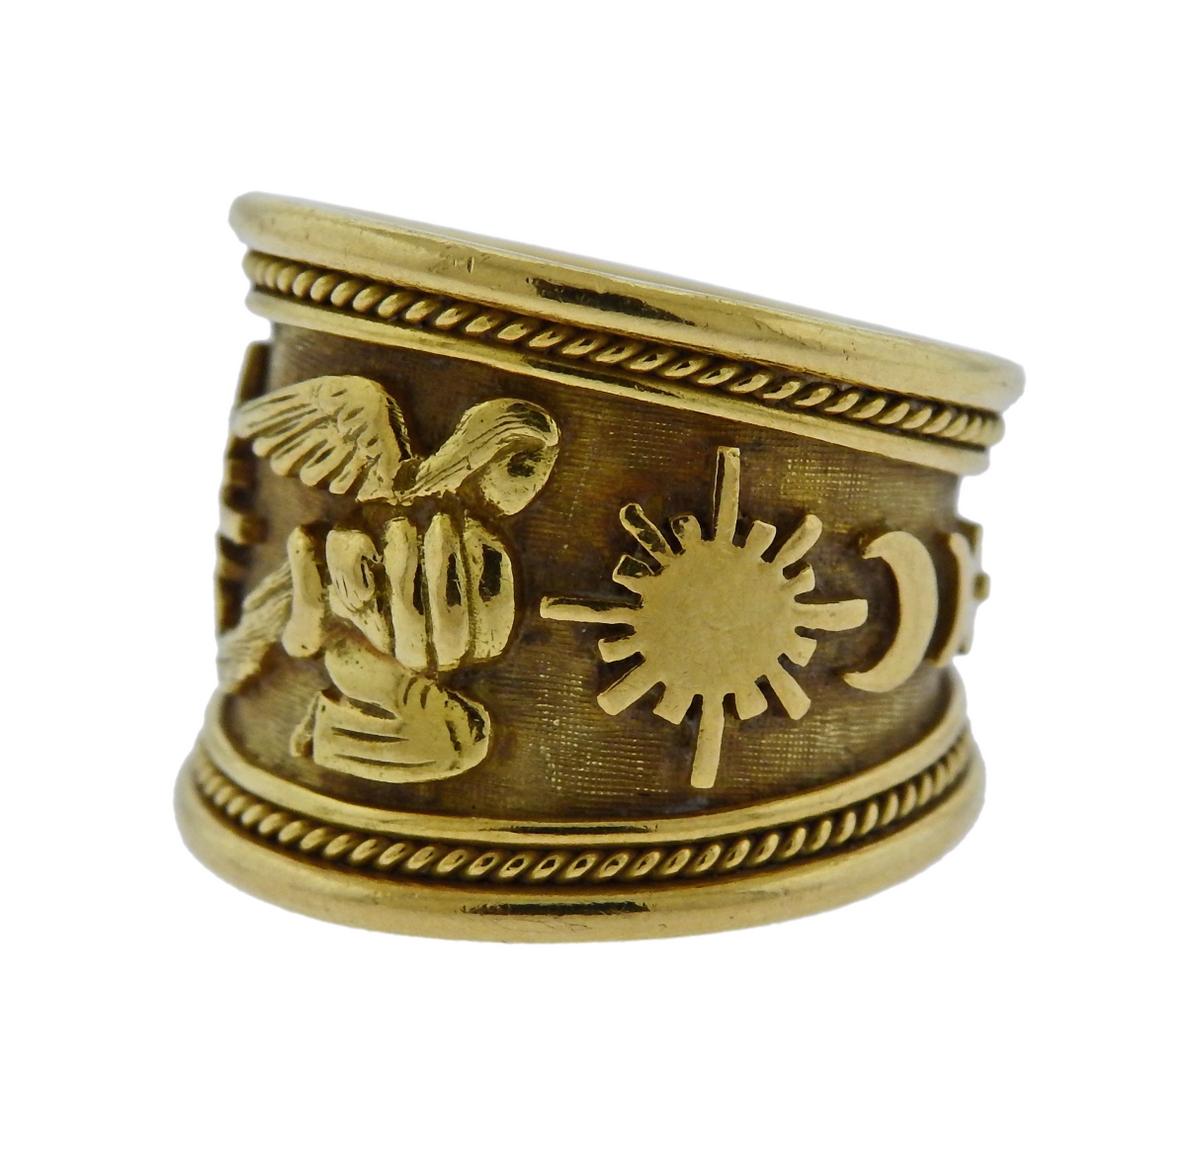 Aquarius Tapered Templar Zodiac Ring in 18k yellow gold wide band ring, crafted by Elizabeth Gage.  Zodiac ring featuring the Aquarius motif and decorated with the sun and moon motifs and the planets Venus and Mercury.  Ring size - 6, ring is 18mm